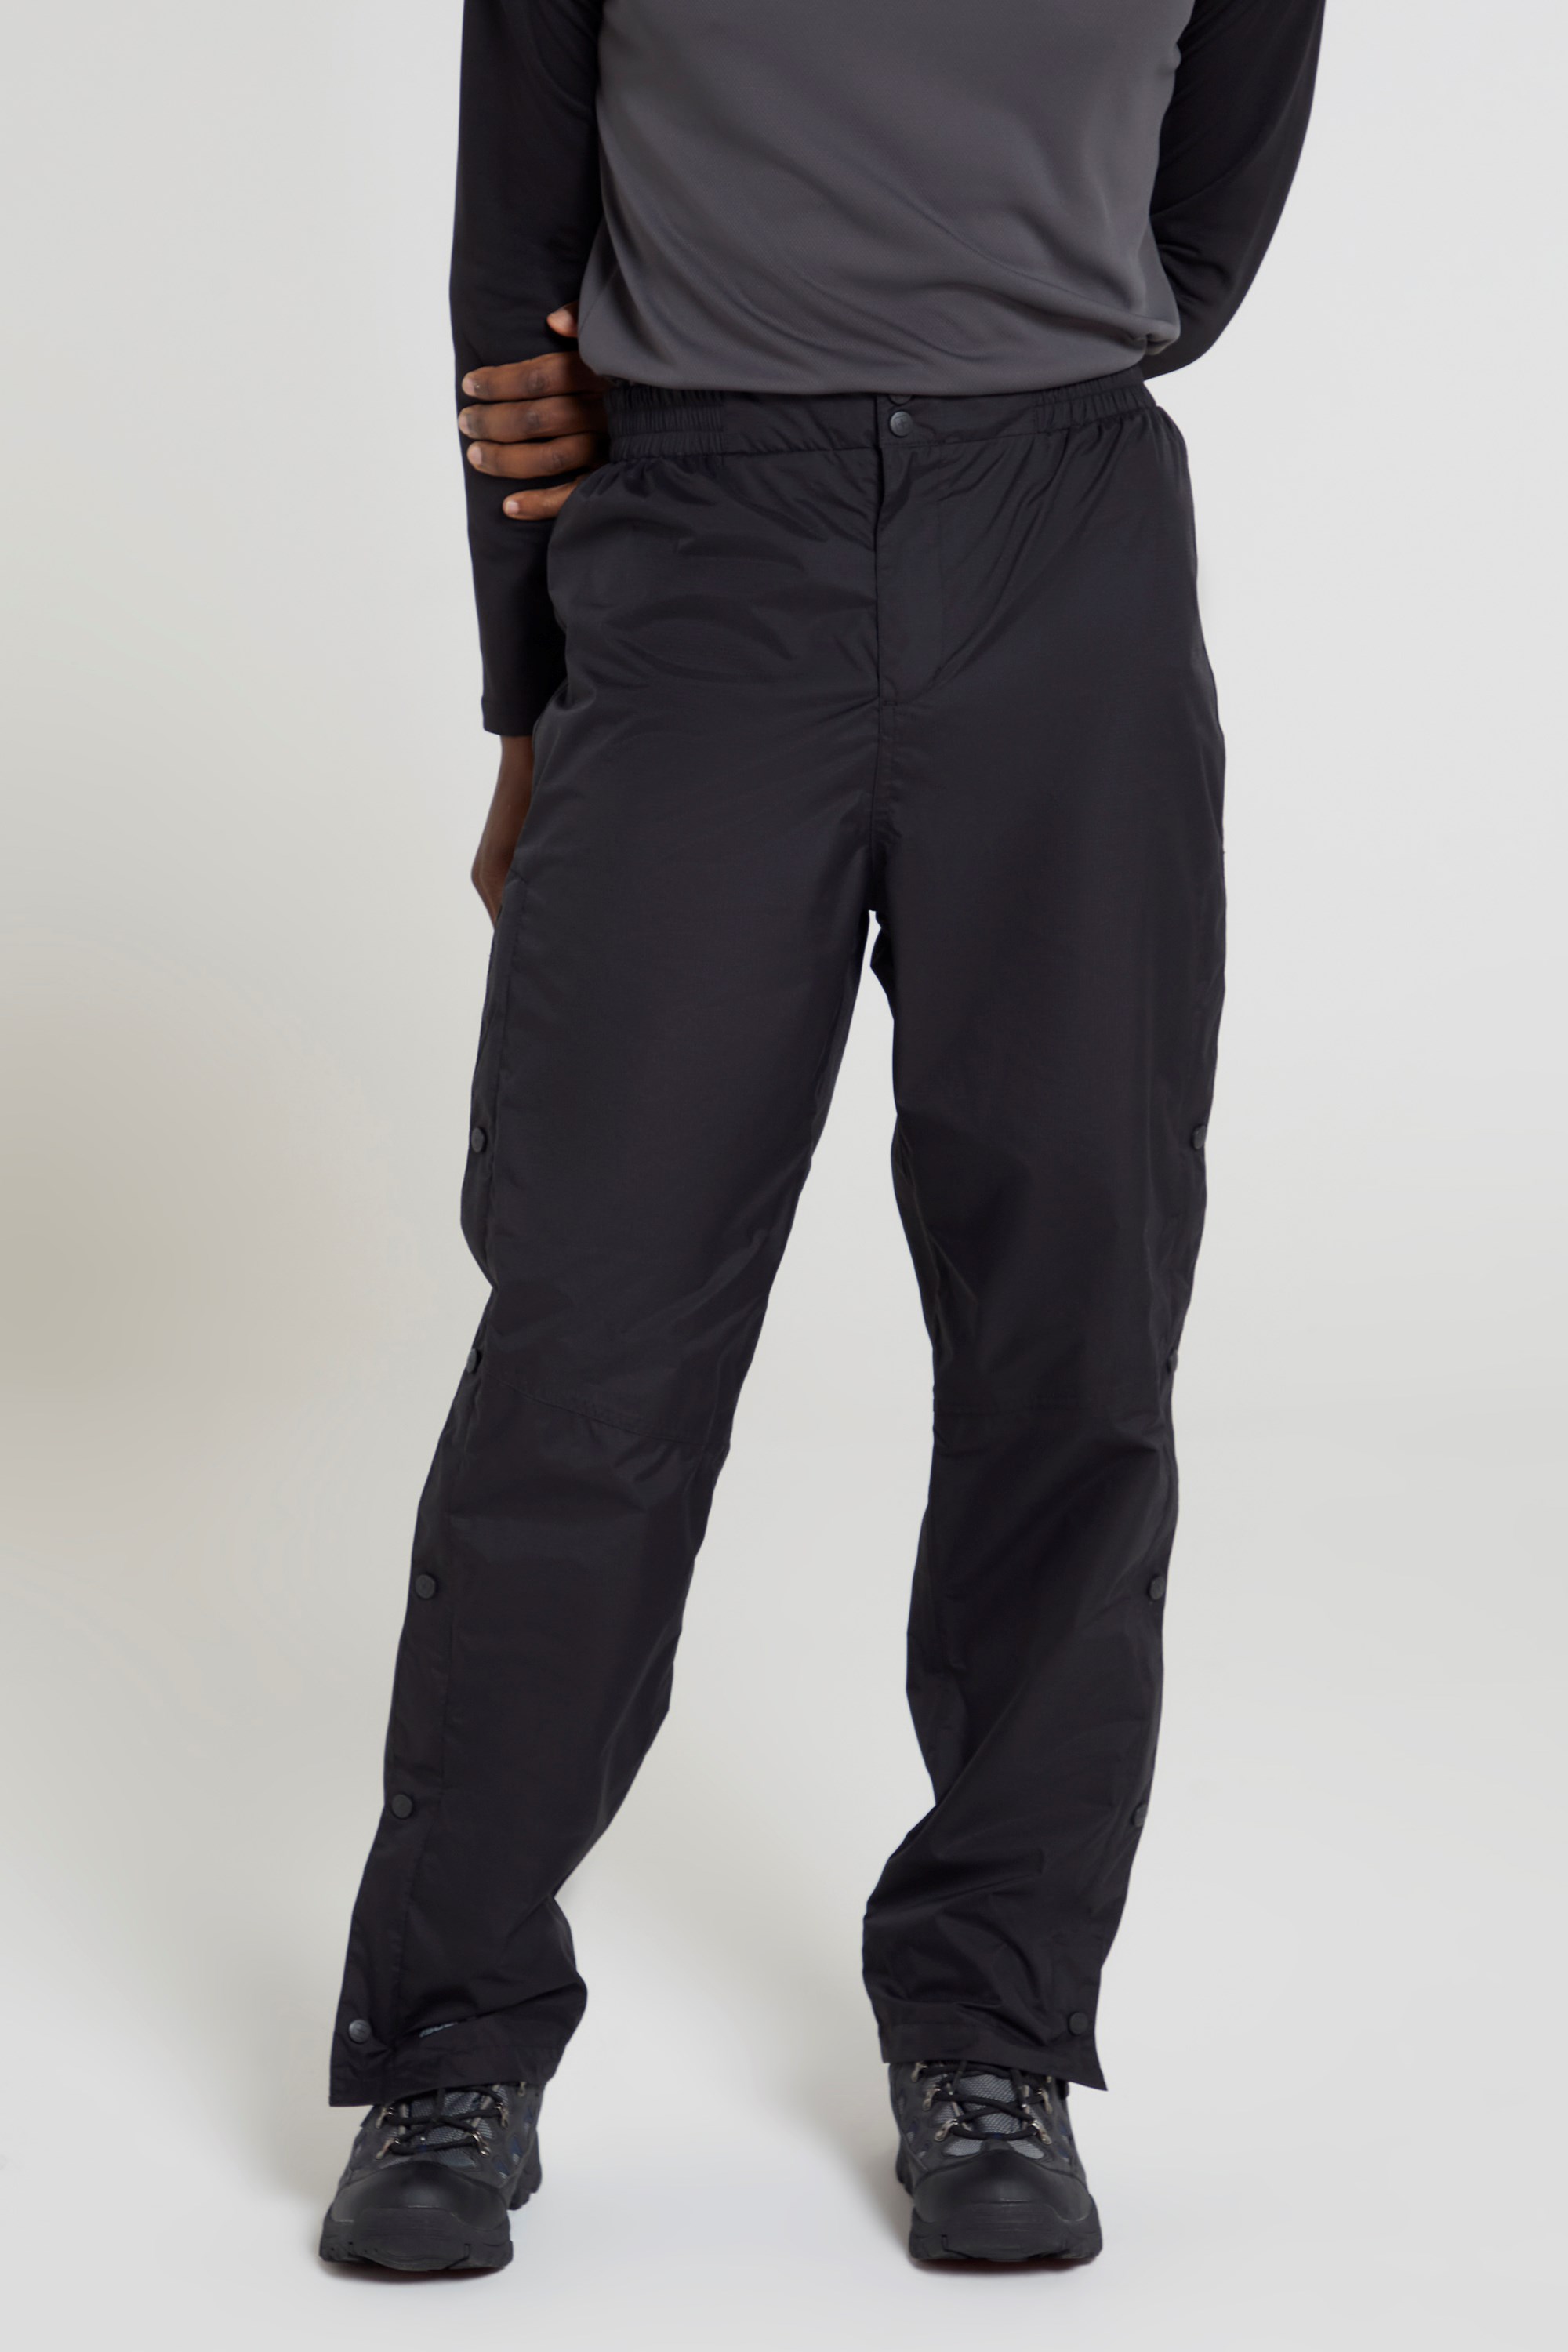 GORETEX FOUL WEATHER OVER TROUSER OR 4XL  Dawnthrive